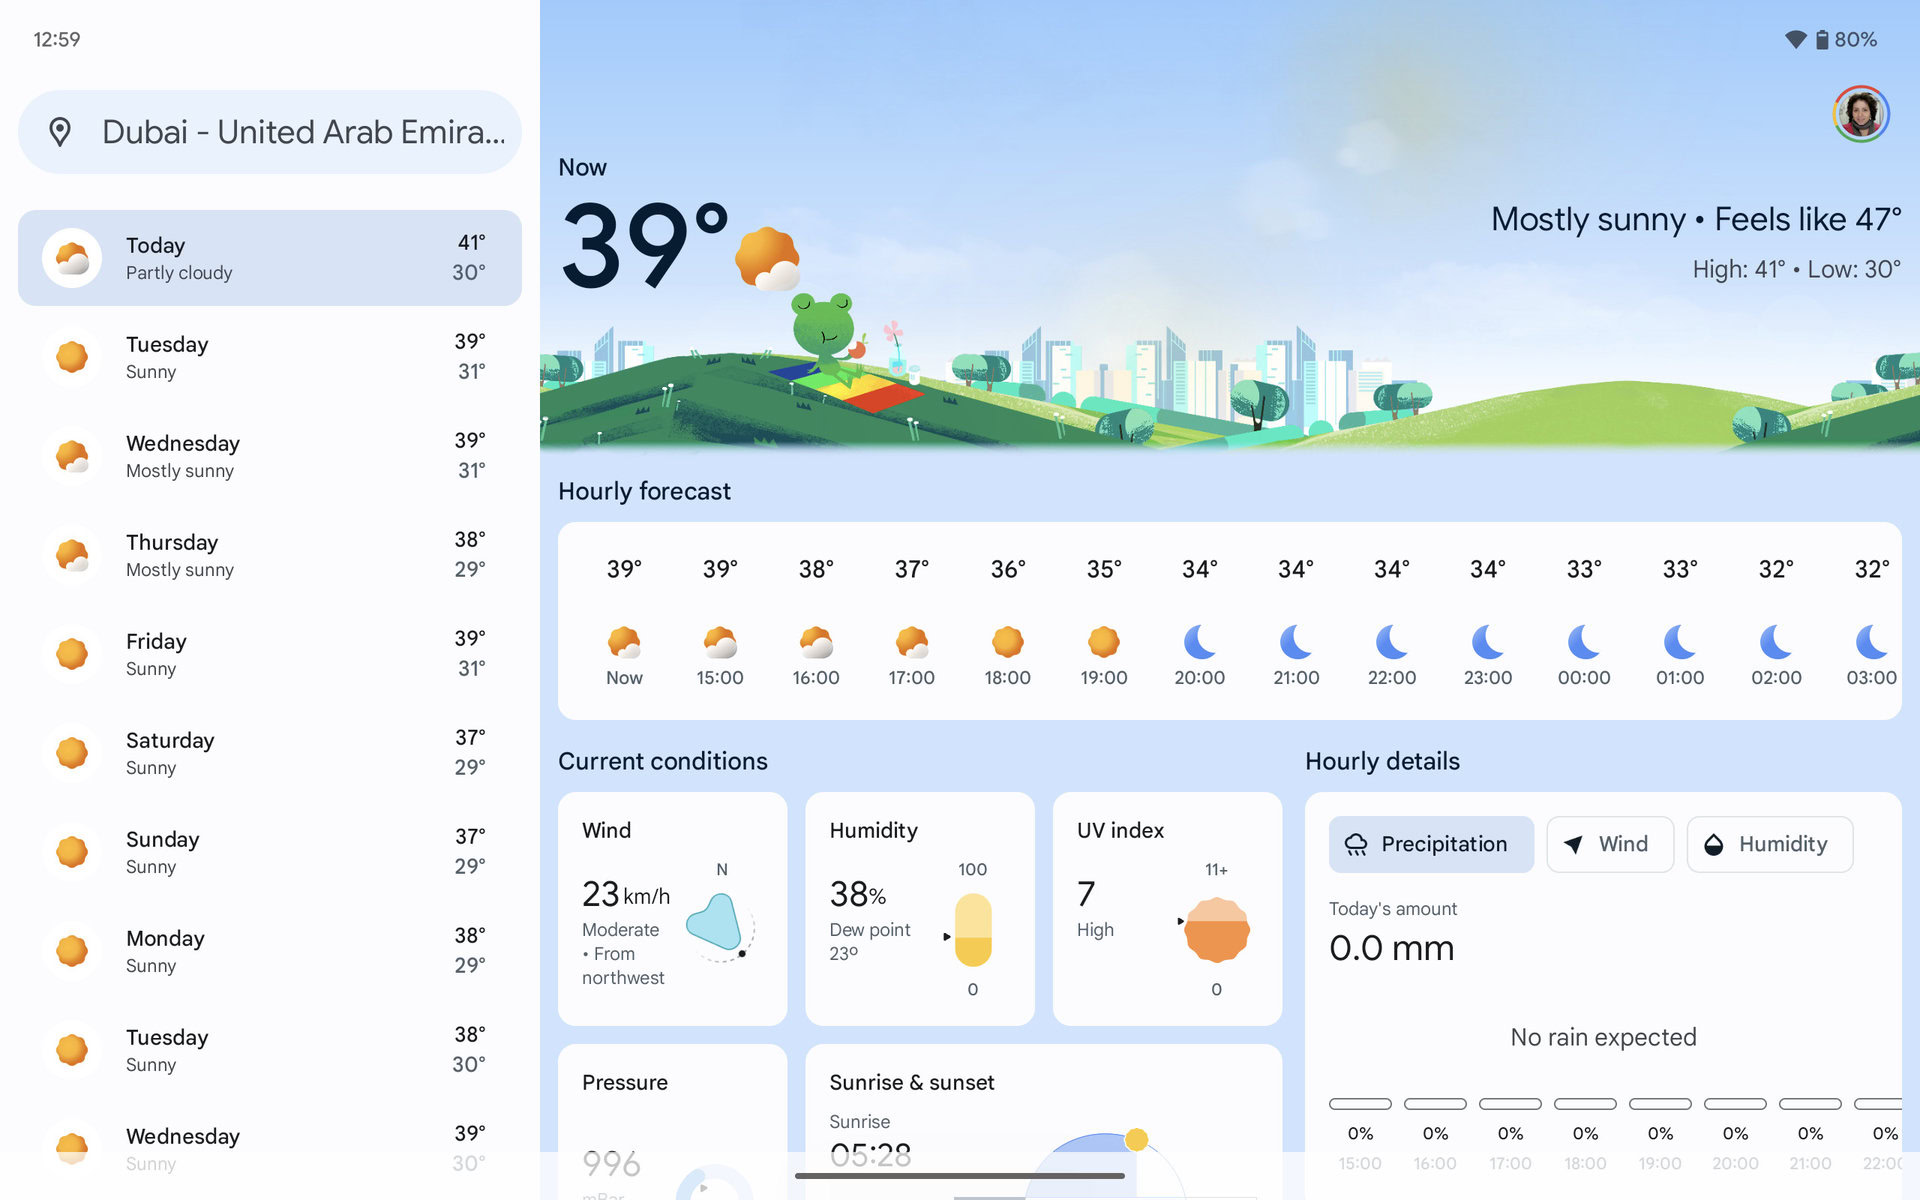 Google adds air quality information to weather map in search results